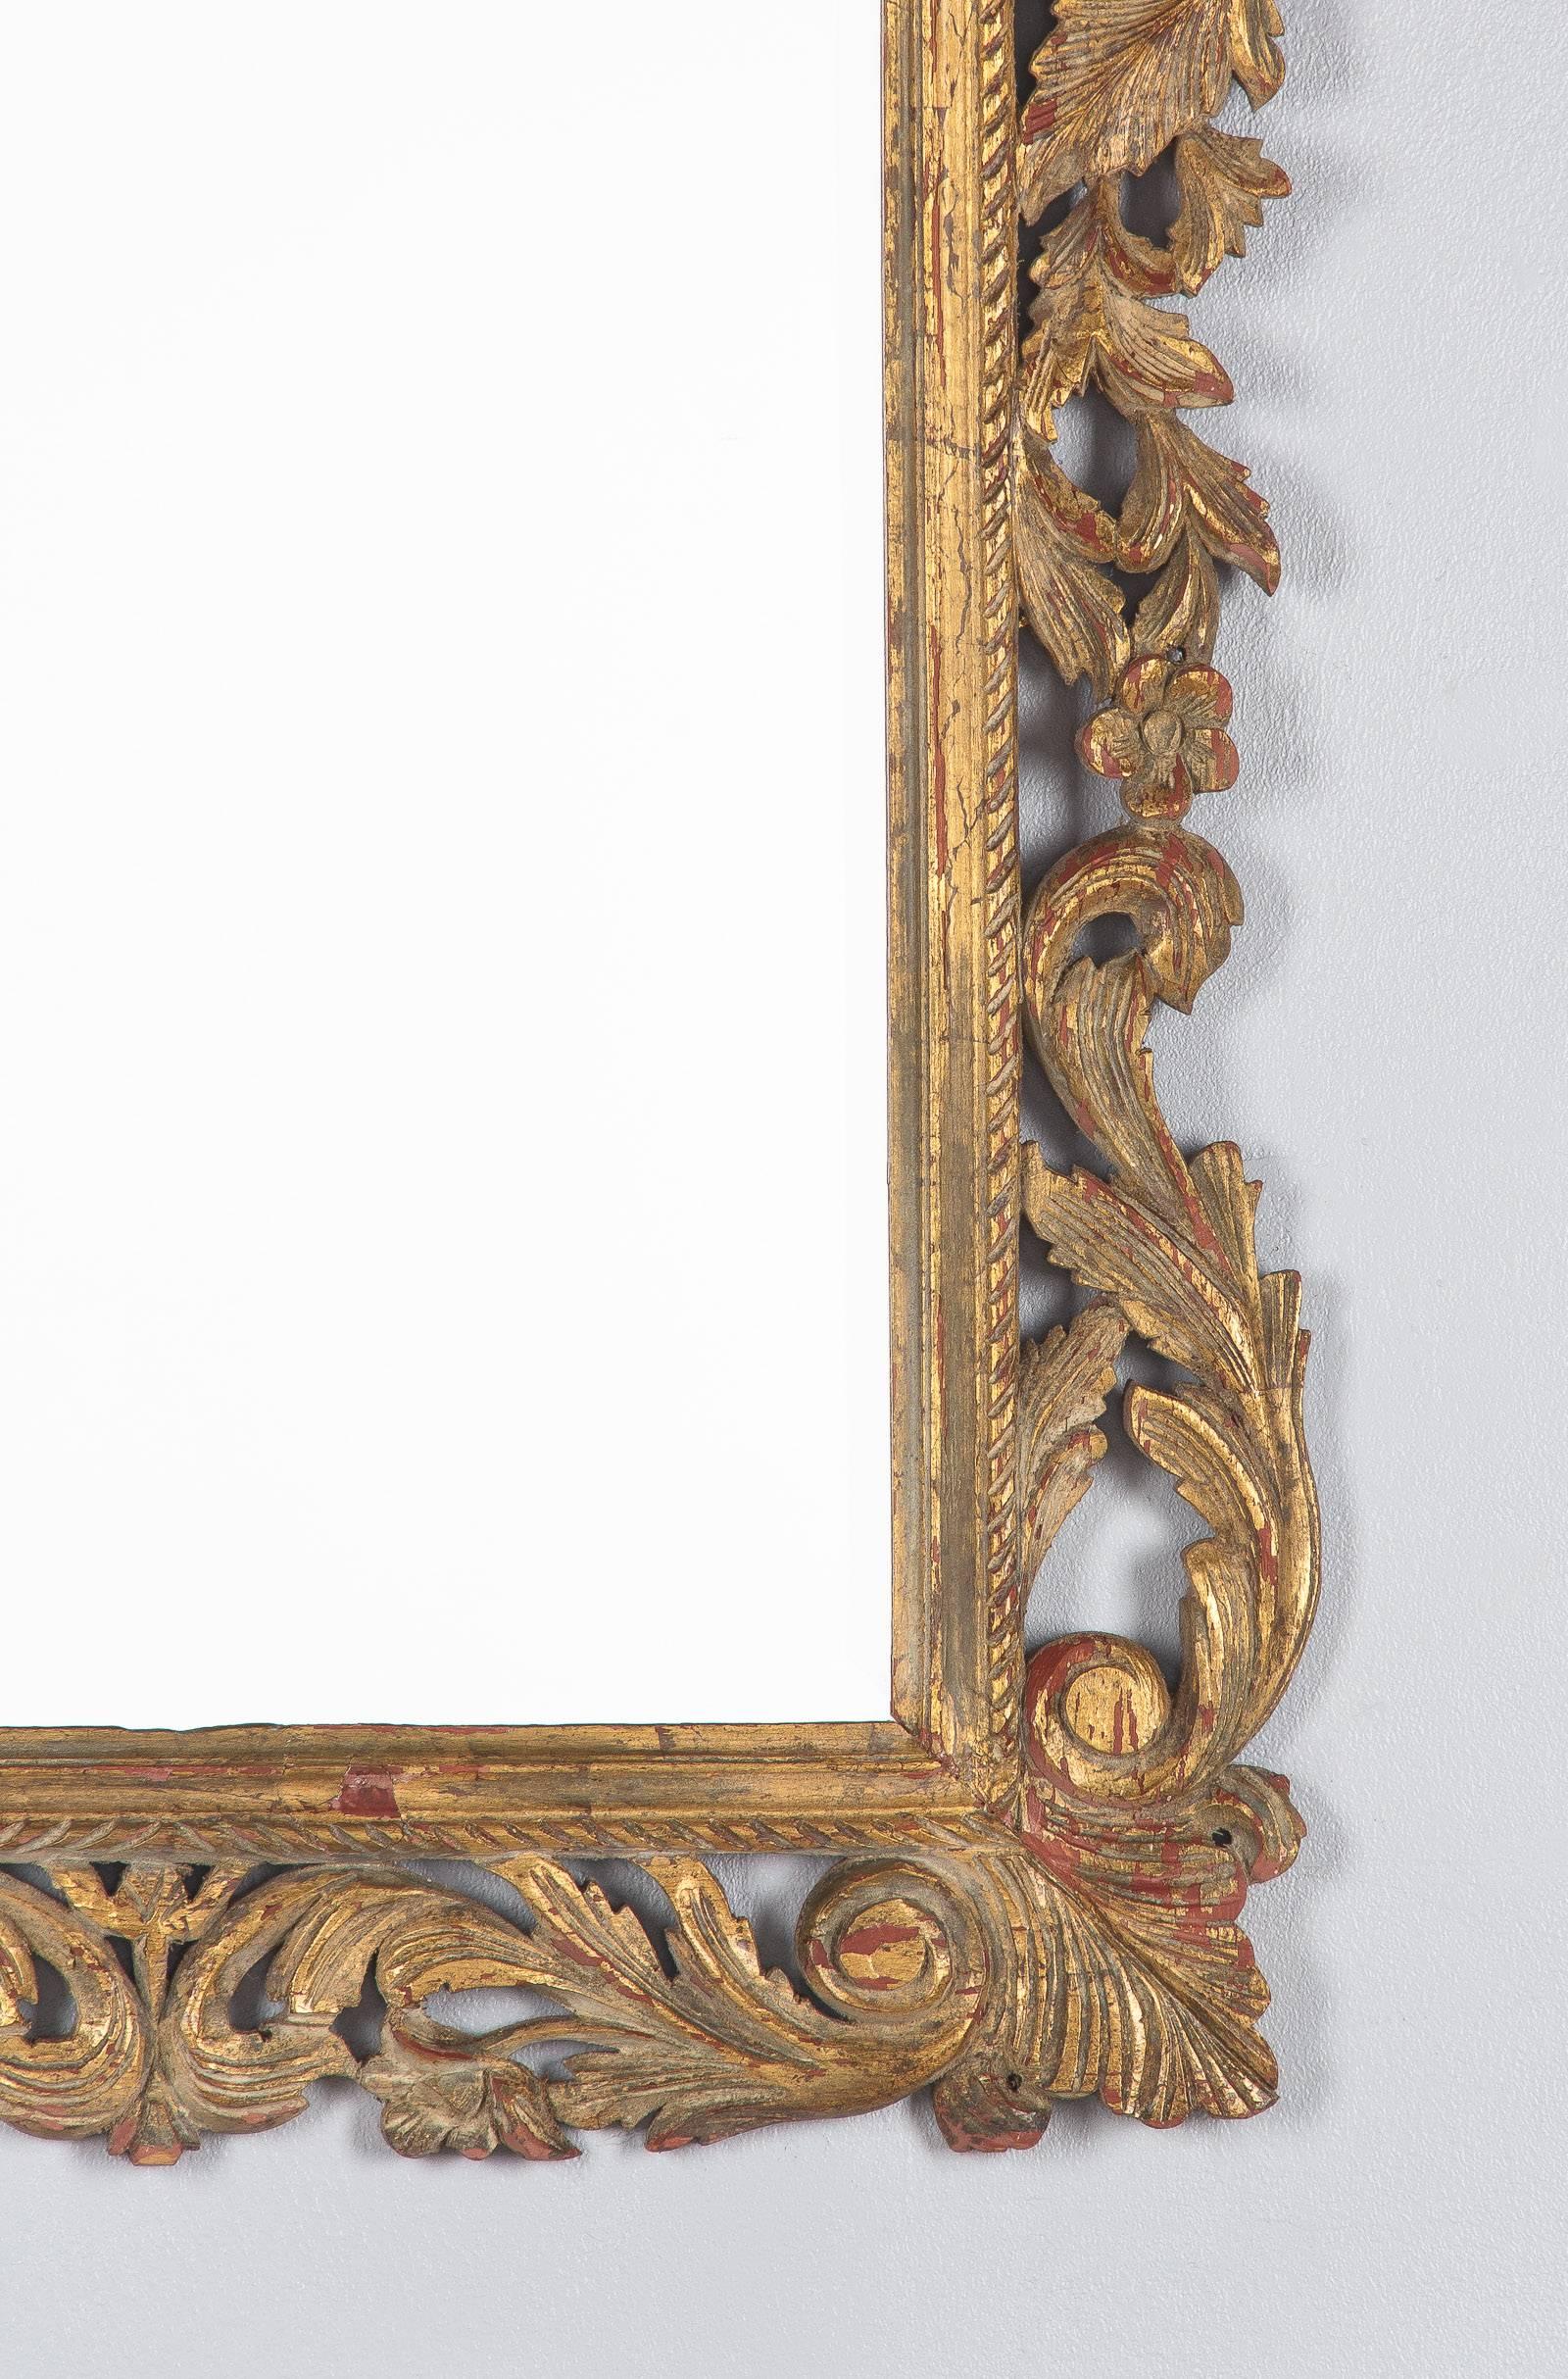 Rococo Revival French Rococo Style Mirror with Gilt Wood Frame, Early 1900s